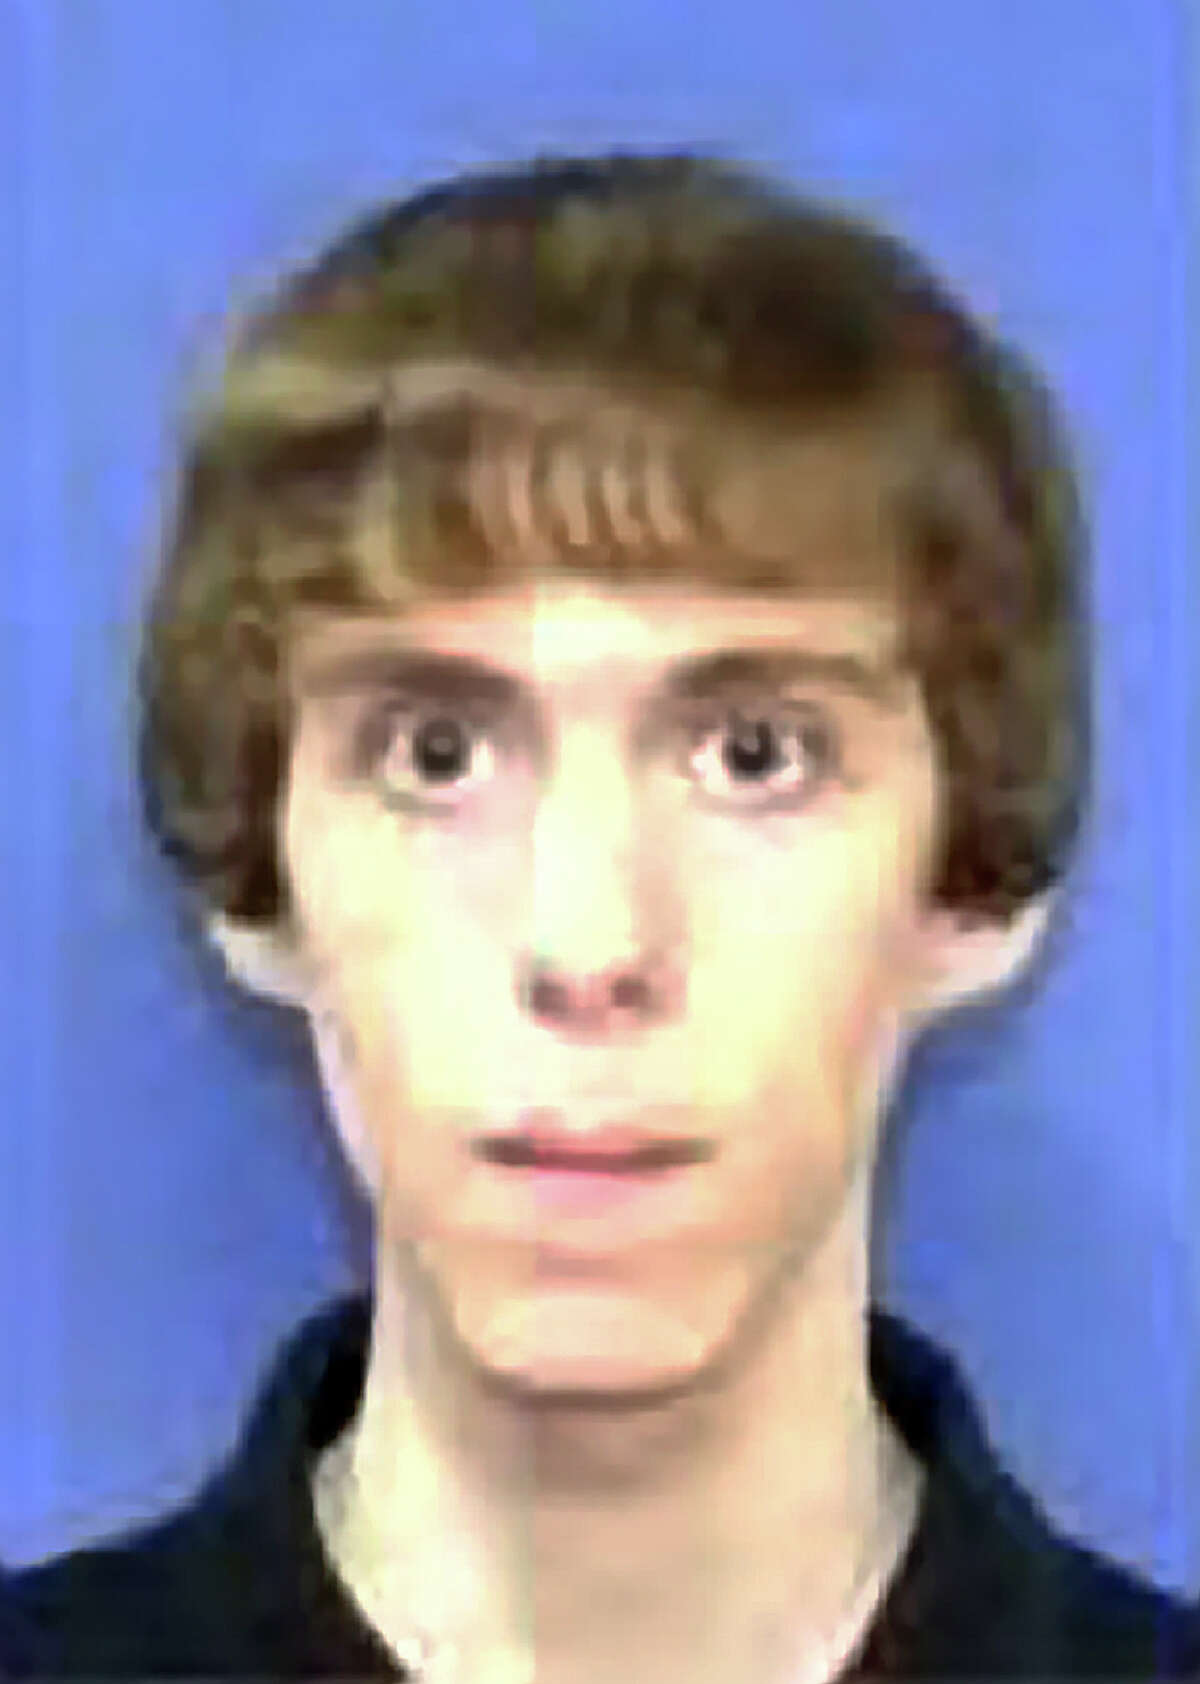 FILE - This undated file photo circulated by law enforcement and provided by NBC News, shows Adam Lanza, who authorities said Lanza killed his mother at their home and then opened fire inside the Sandy Hook Elementary School in Newtown, Conn., on Friday, Dec. 14, 2012. Search warrants released Thursday, March 28, 2013, revealed that an arsenal of weapons including guns, more than a thousand rounds of ammunition, a bayonet and several swords was seized in the Lanza home. (AP Photo/NBC News, File)